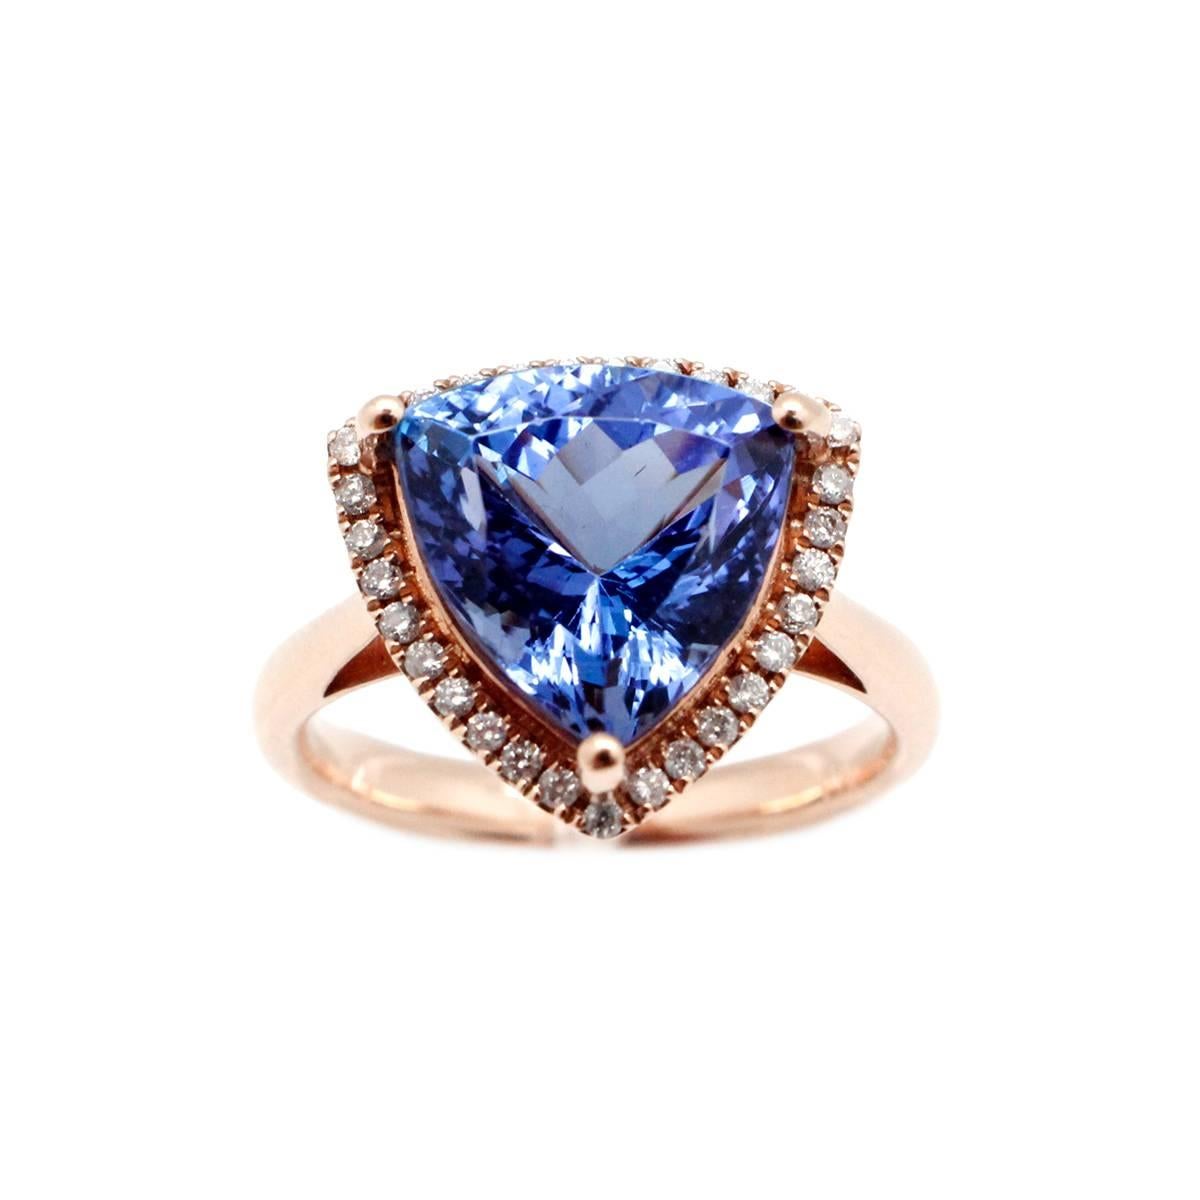 This custom ring produced by Aristocrat Jewelry features an absolutely stunning center Natural Vivid Violetish Blue Trillion Cut 6.07 Carat Tanzanite with 30 diamonds on the border of the center stone totalling .31 Carats. The surrounding diamonds